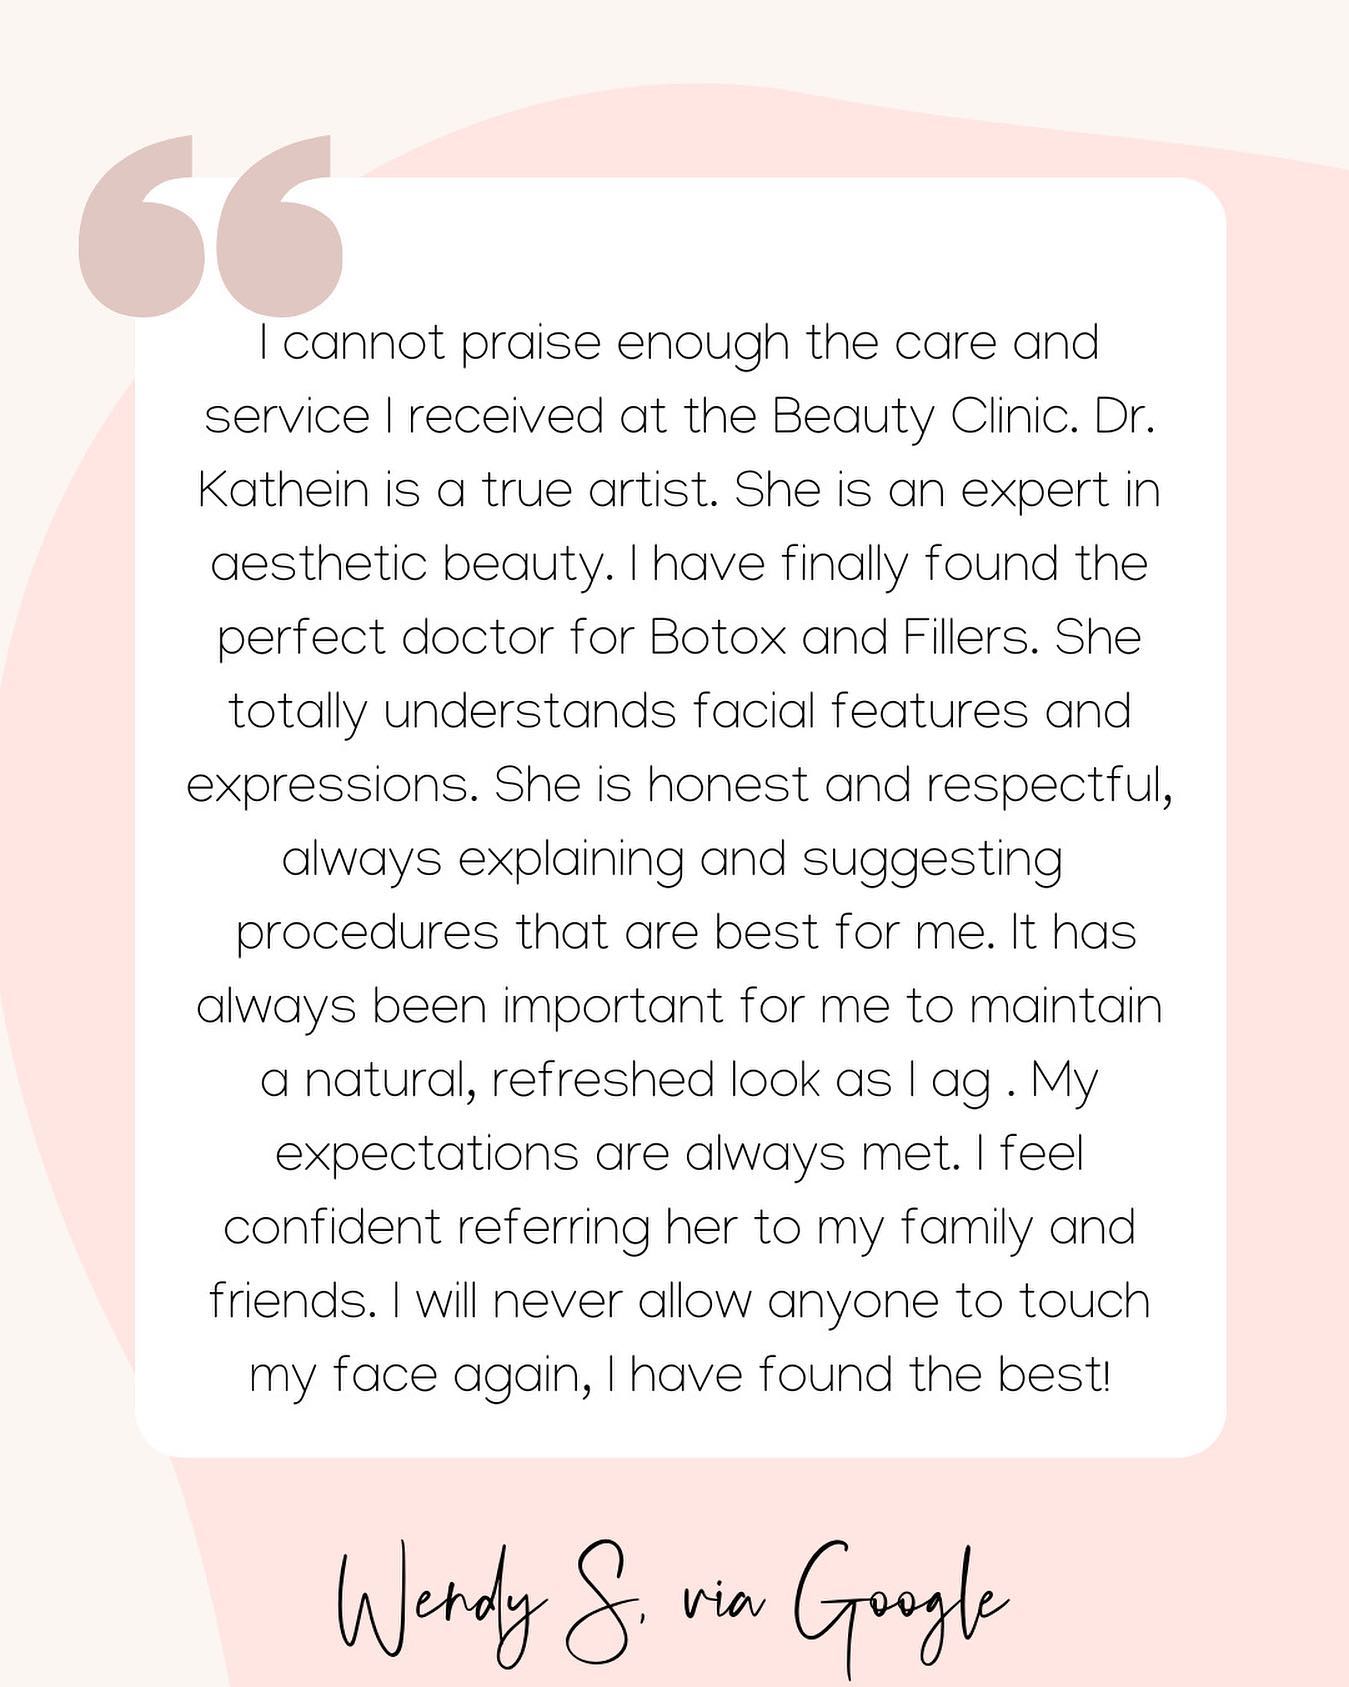 I cannot praise enough the care and service I received at the Beauty Clinic.